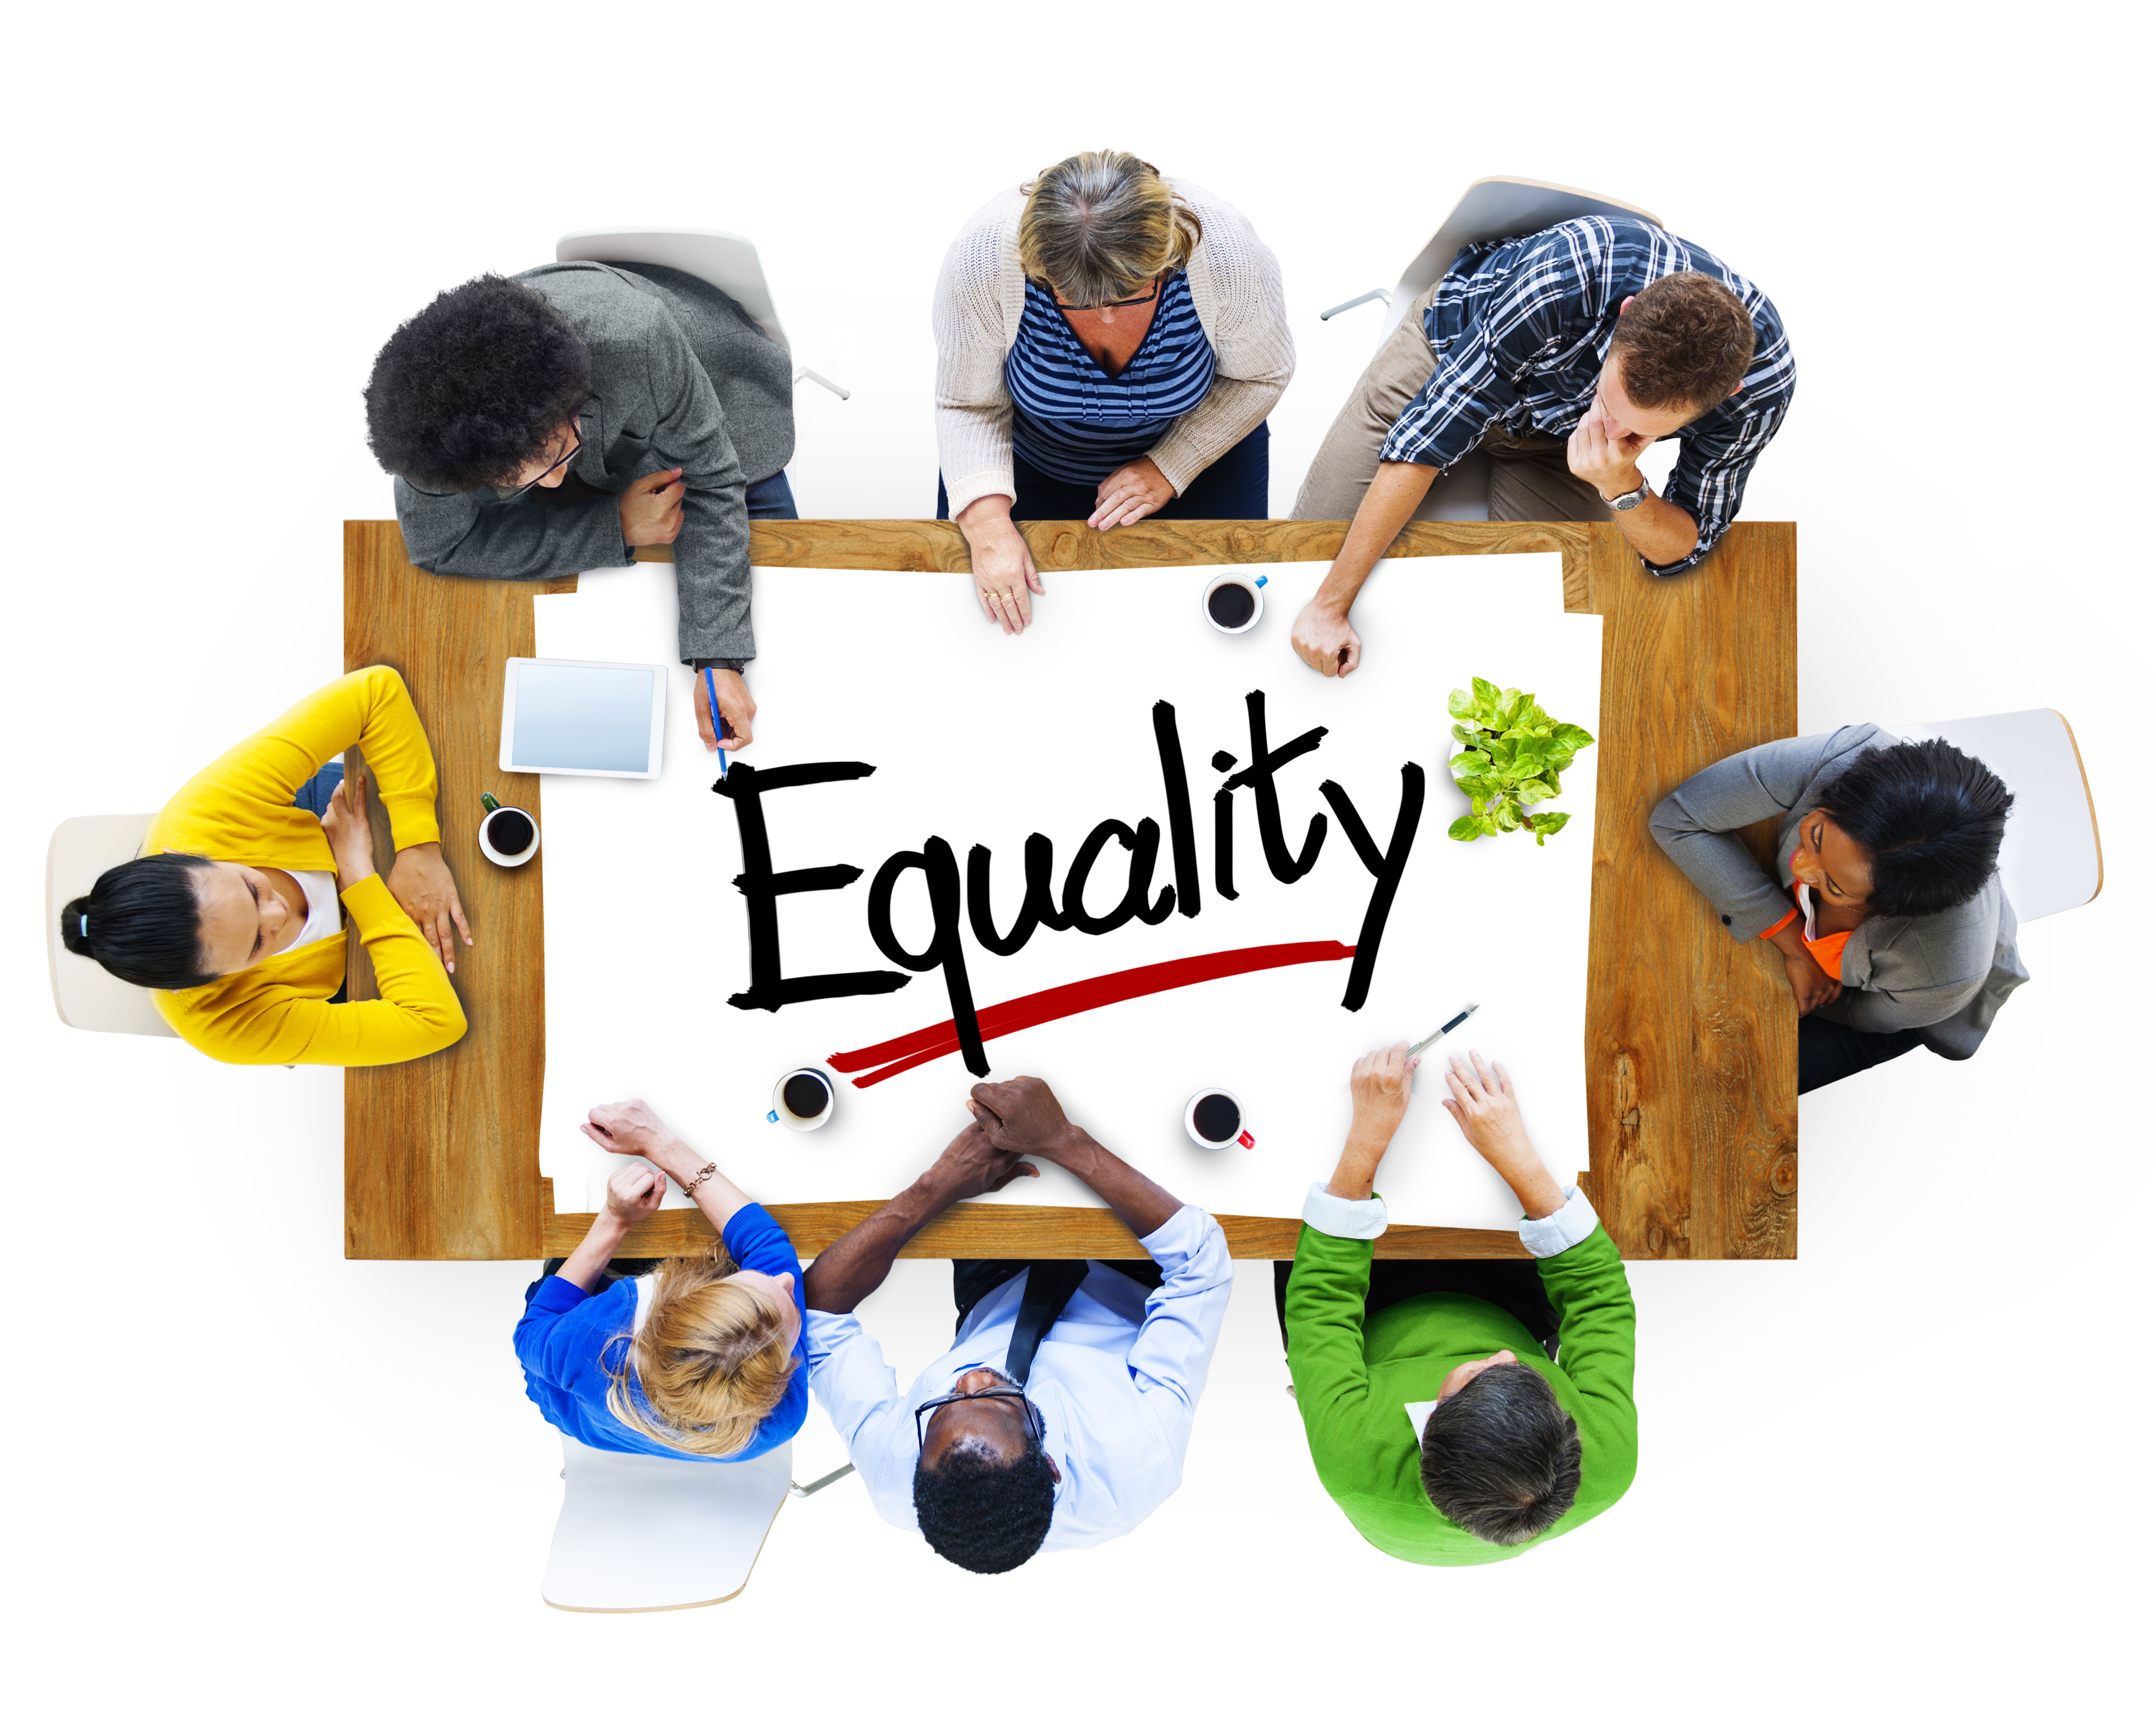 workers at a table with equality written on a paper